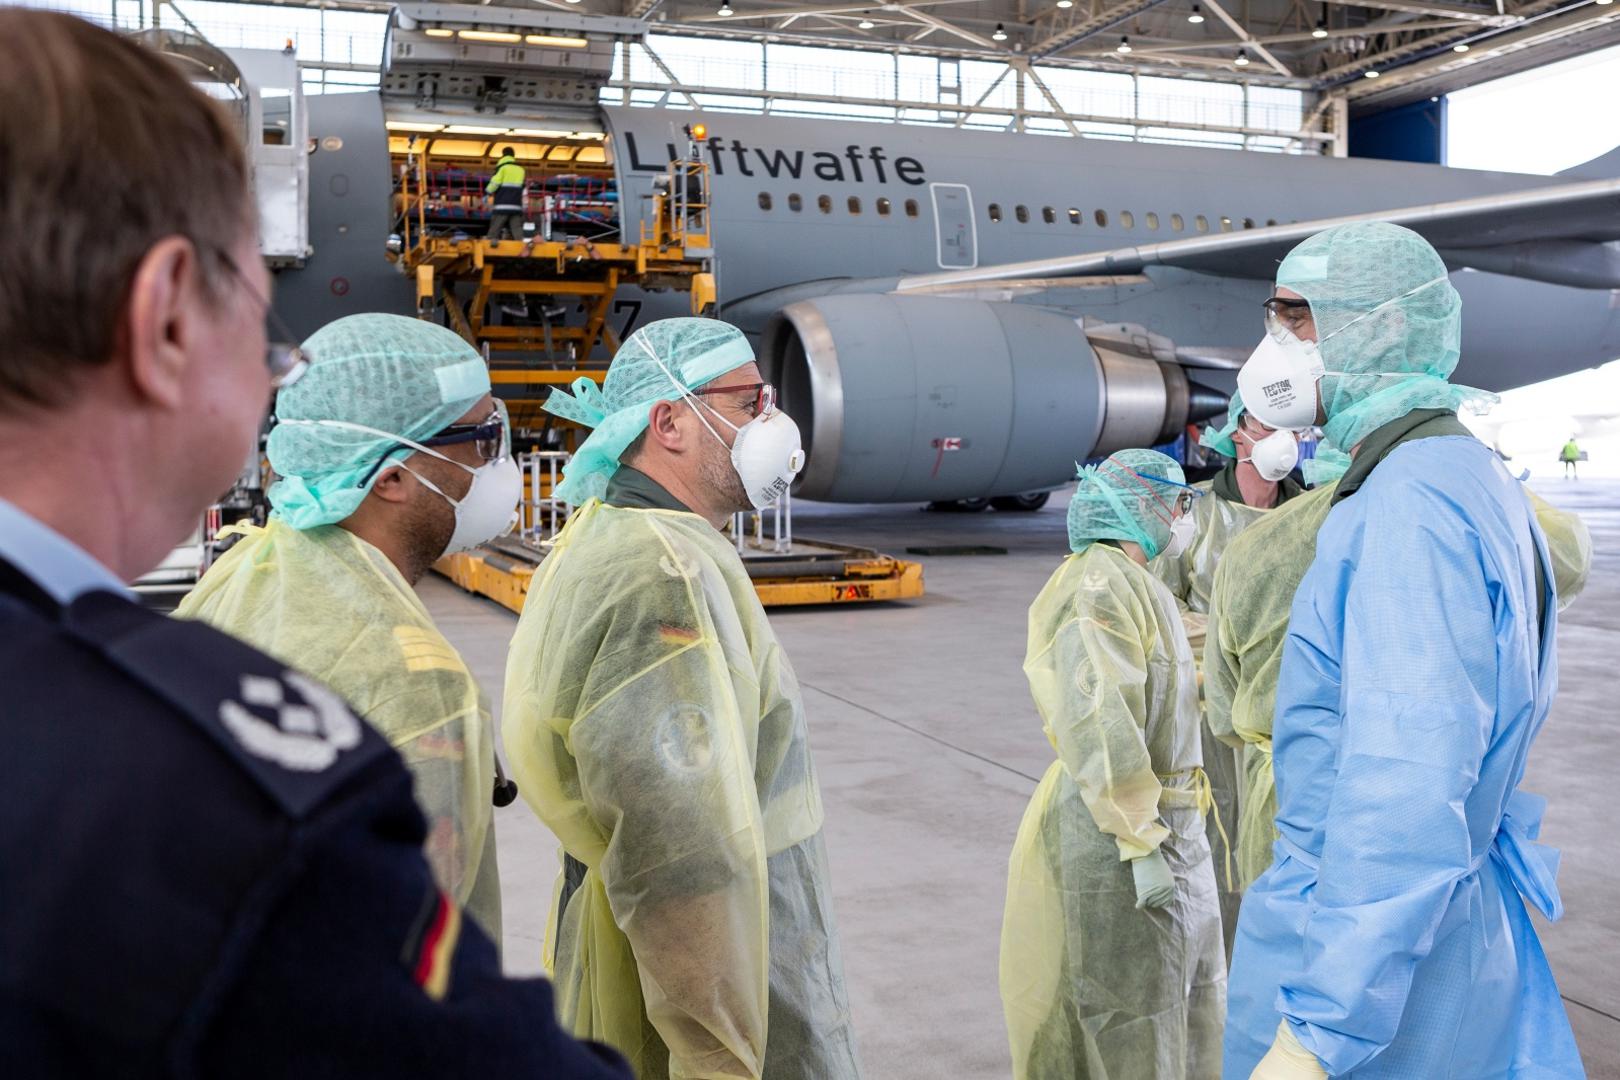 German air force Airbus A-310 "Medivac\ A Bundeswehr handout photo shows staff in protective suits leaving the German air force Airbus A-310 "Medivac" with coronavirus patients from Bergamo, after their arrival in Cologne, Germany, March 28, 2020, as the spread of the coronavirus disease (COVID-19) continues.     Luftwaffe/Kevin Schrief/Handout via Reuters ATTENTION EDITORS - THIS IMAGE HAS BEEN SUPPLIED BY A THIRD PARTY. NO RESALES. NO ARCHIVES. Luftwaffe/Kevin Schrief